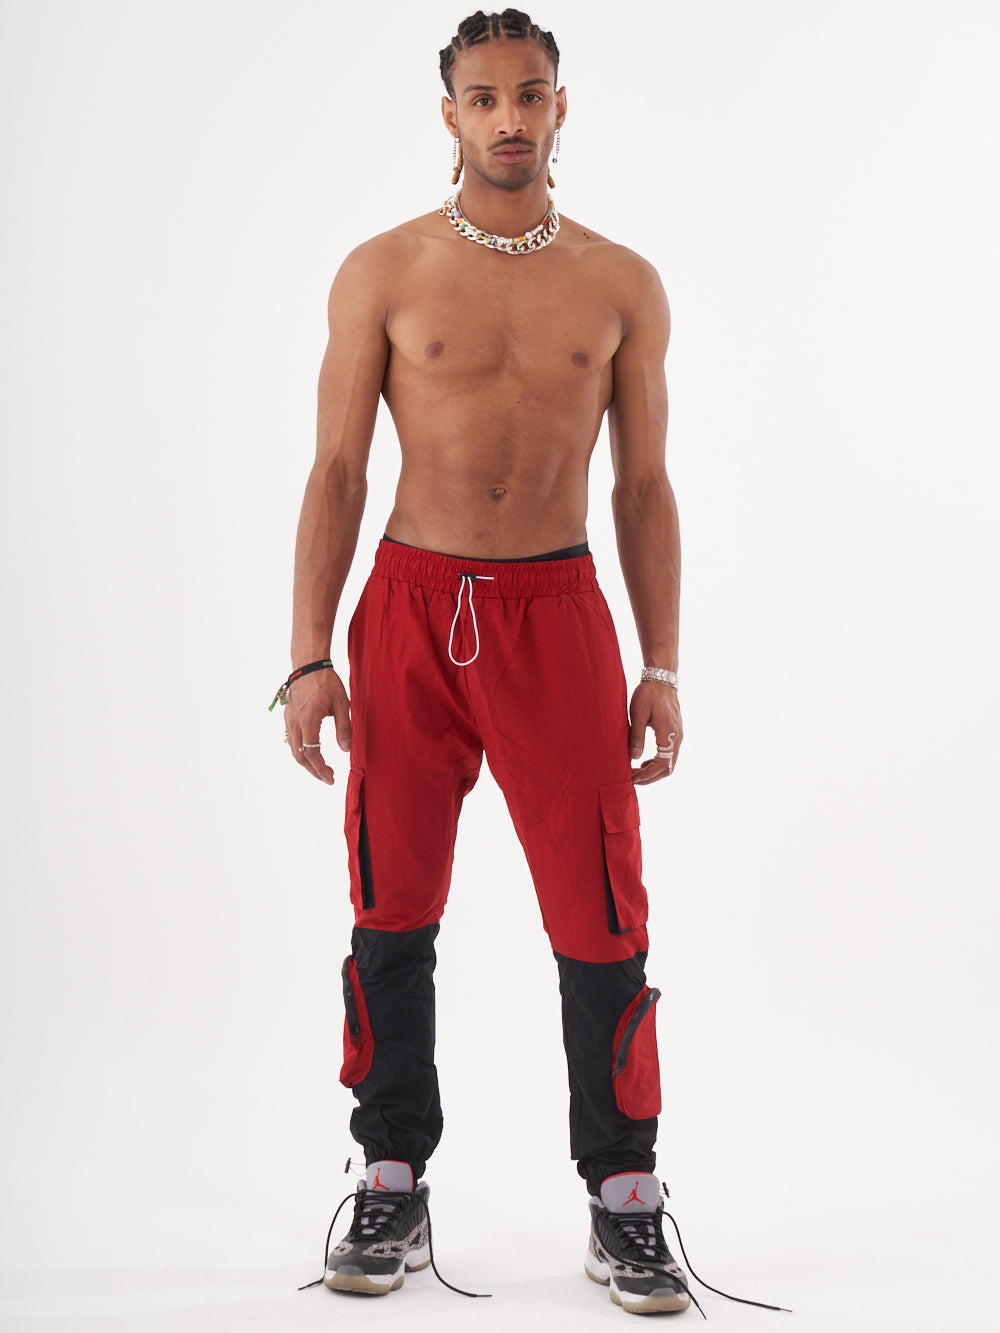 A man wearing the RENEGADE | RED joggers posing for a photo.